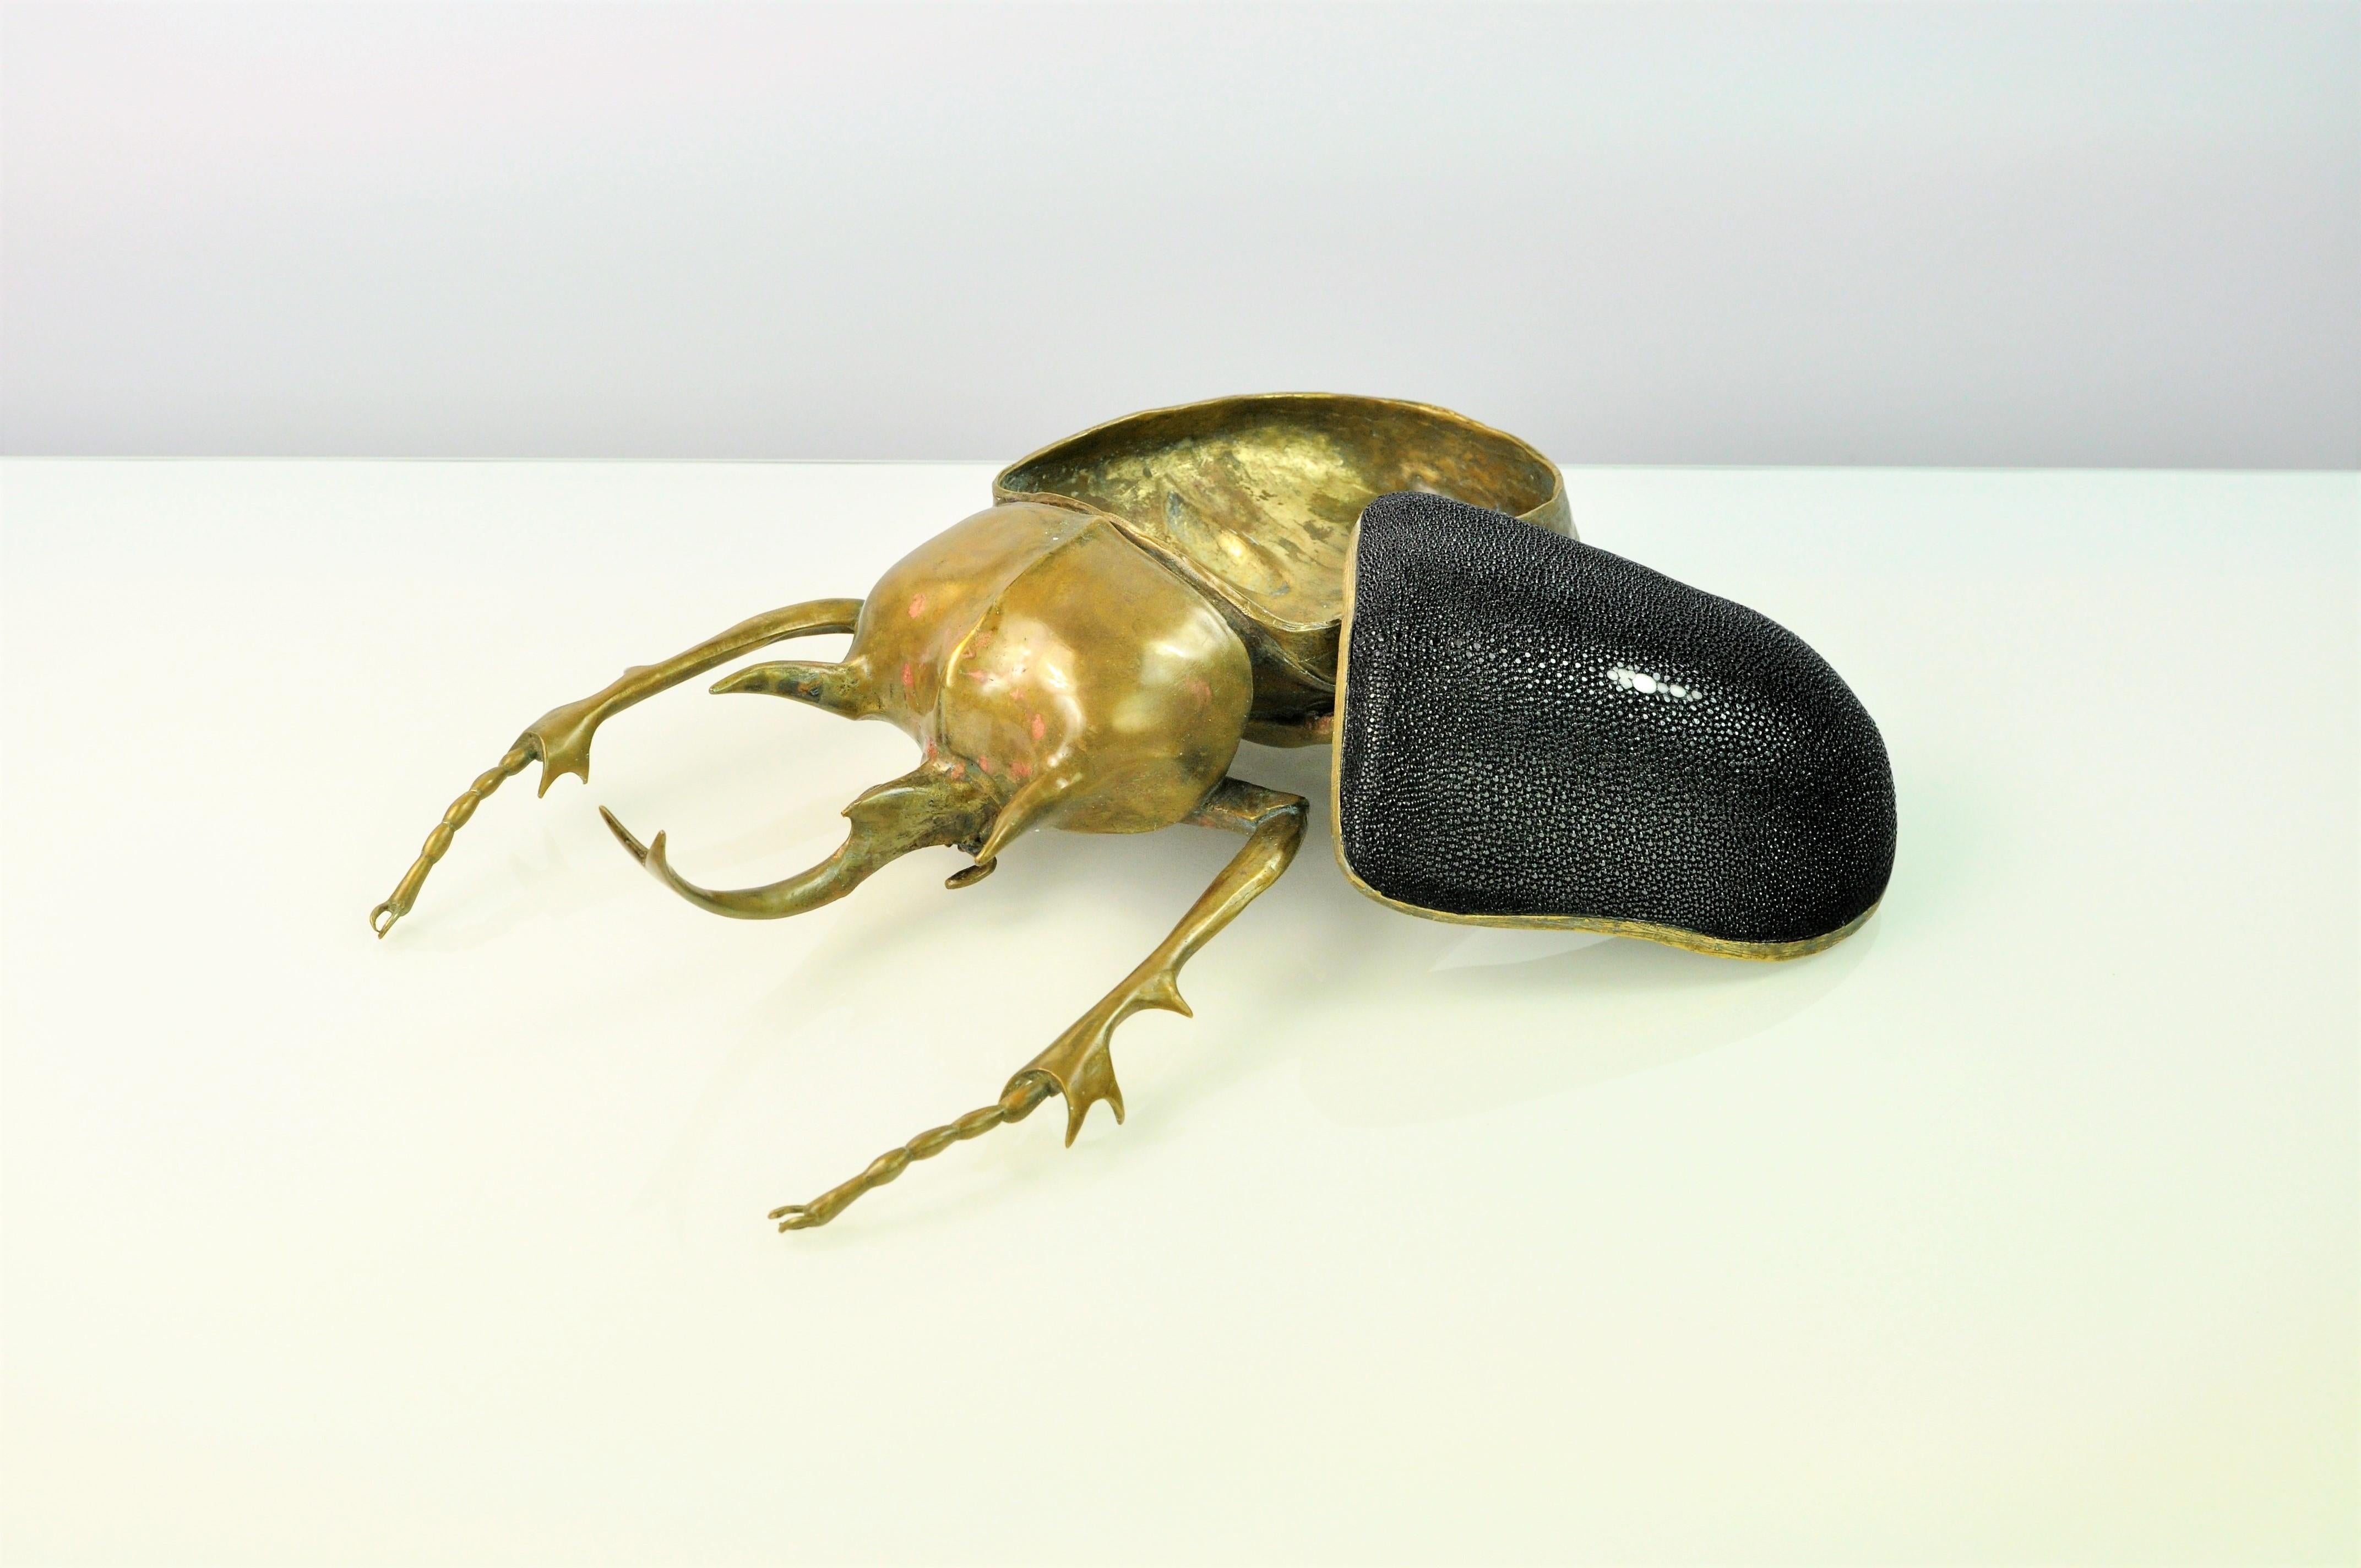 The Elphas Scarab box is a best seller at Ginger Brown.
This piece is made in lost wax cast brass with a bronze patina. The brass lid is covered in shagreen.

That box has been realized from a real scarab. The famous Megasoma actaeon from the family